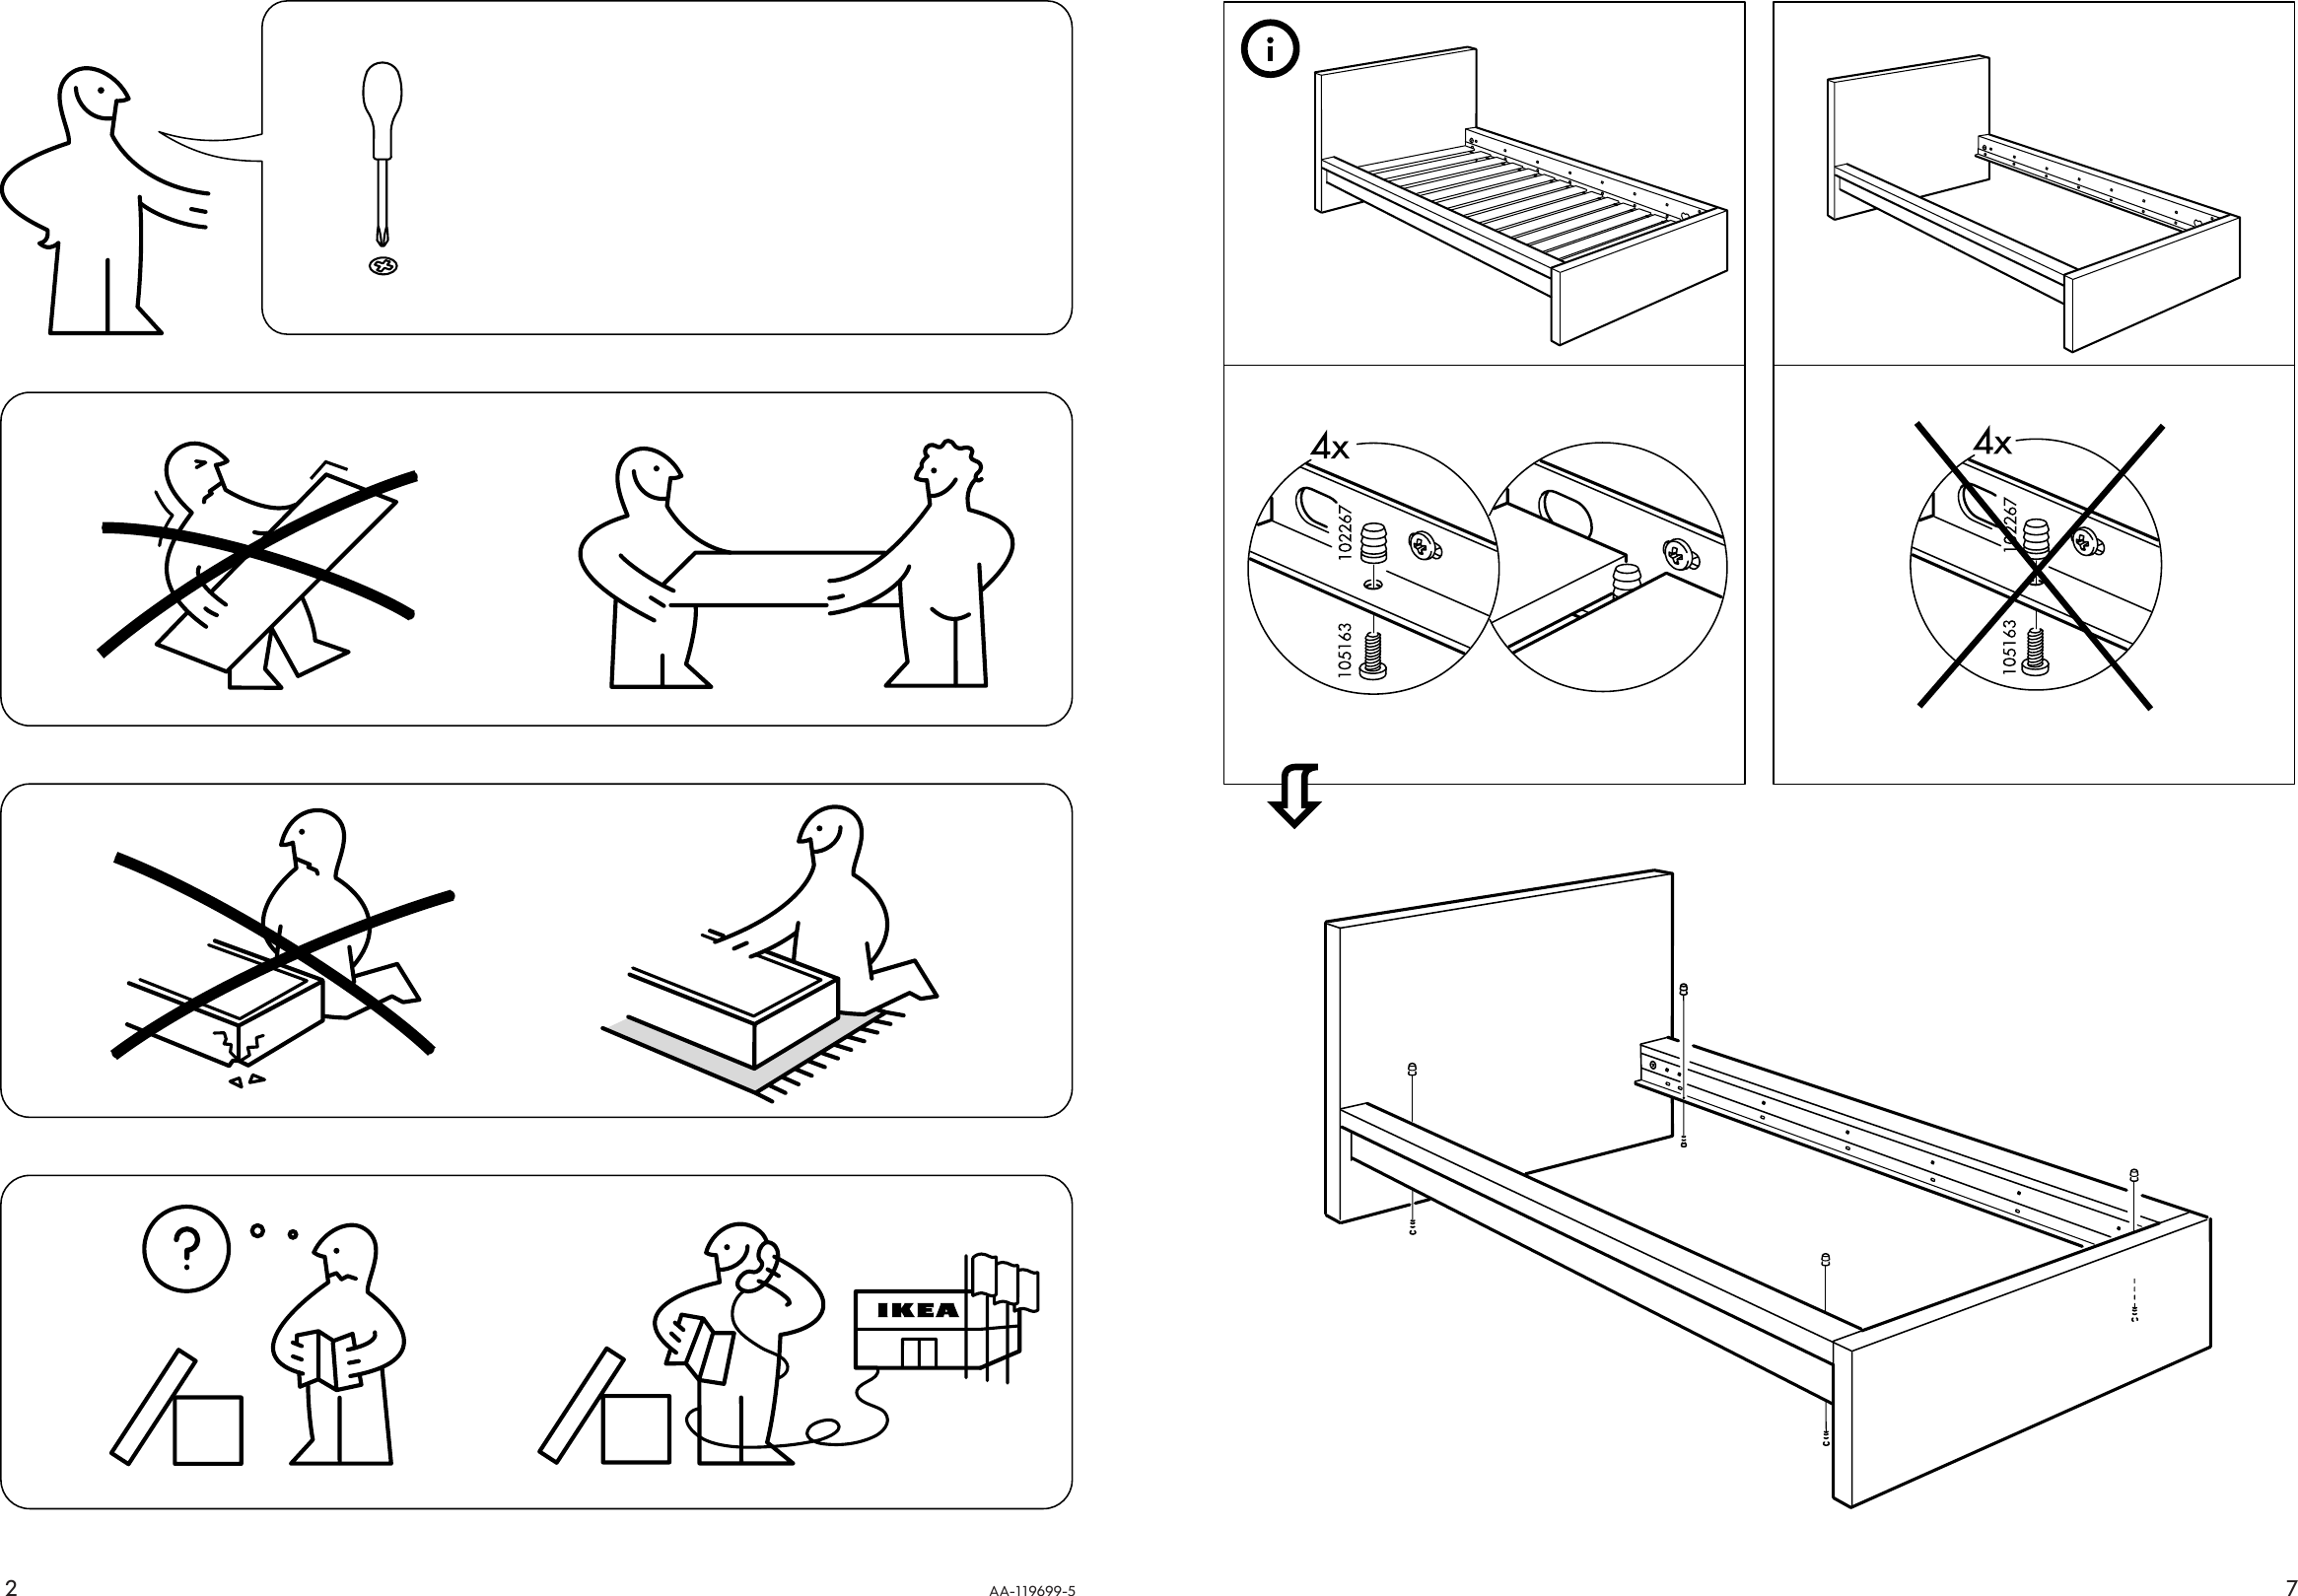 Ikea Malm Bed Frame Twin Assembly, Ikea Malm Full Size Bed Frame Instructions